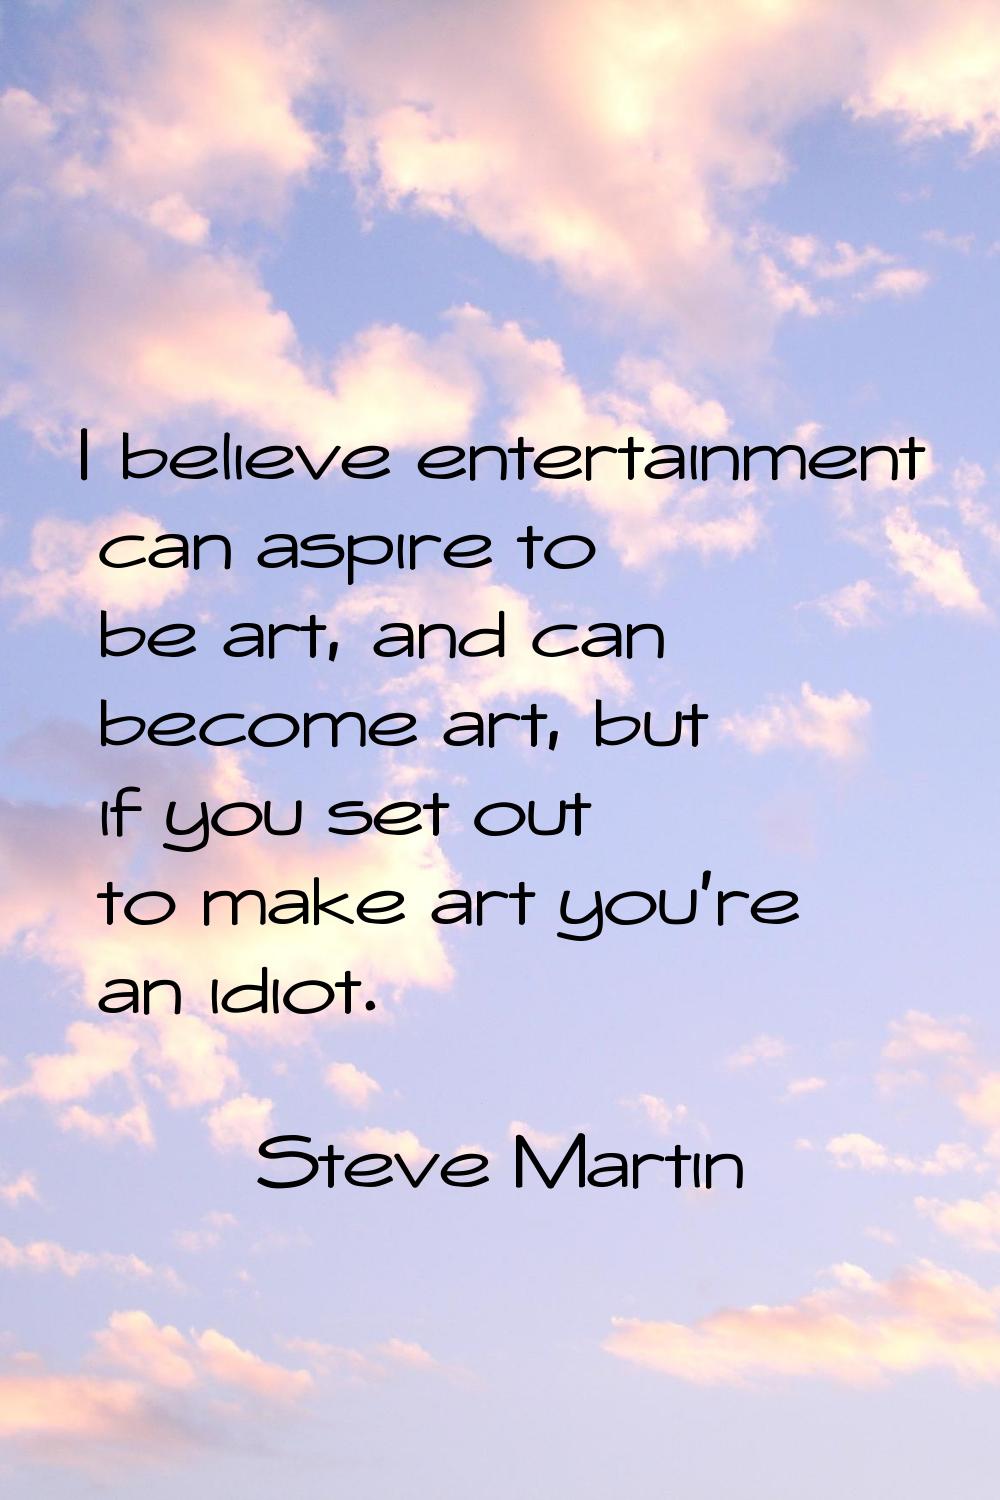 I believe entertainment can aspire to be art, and can become art, but if you set out to make art yo